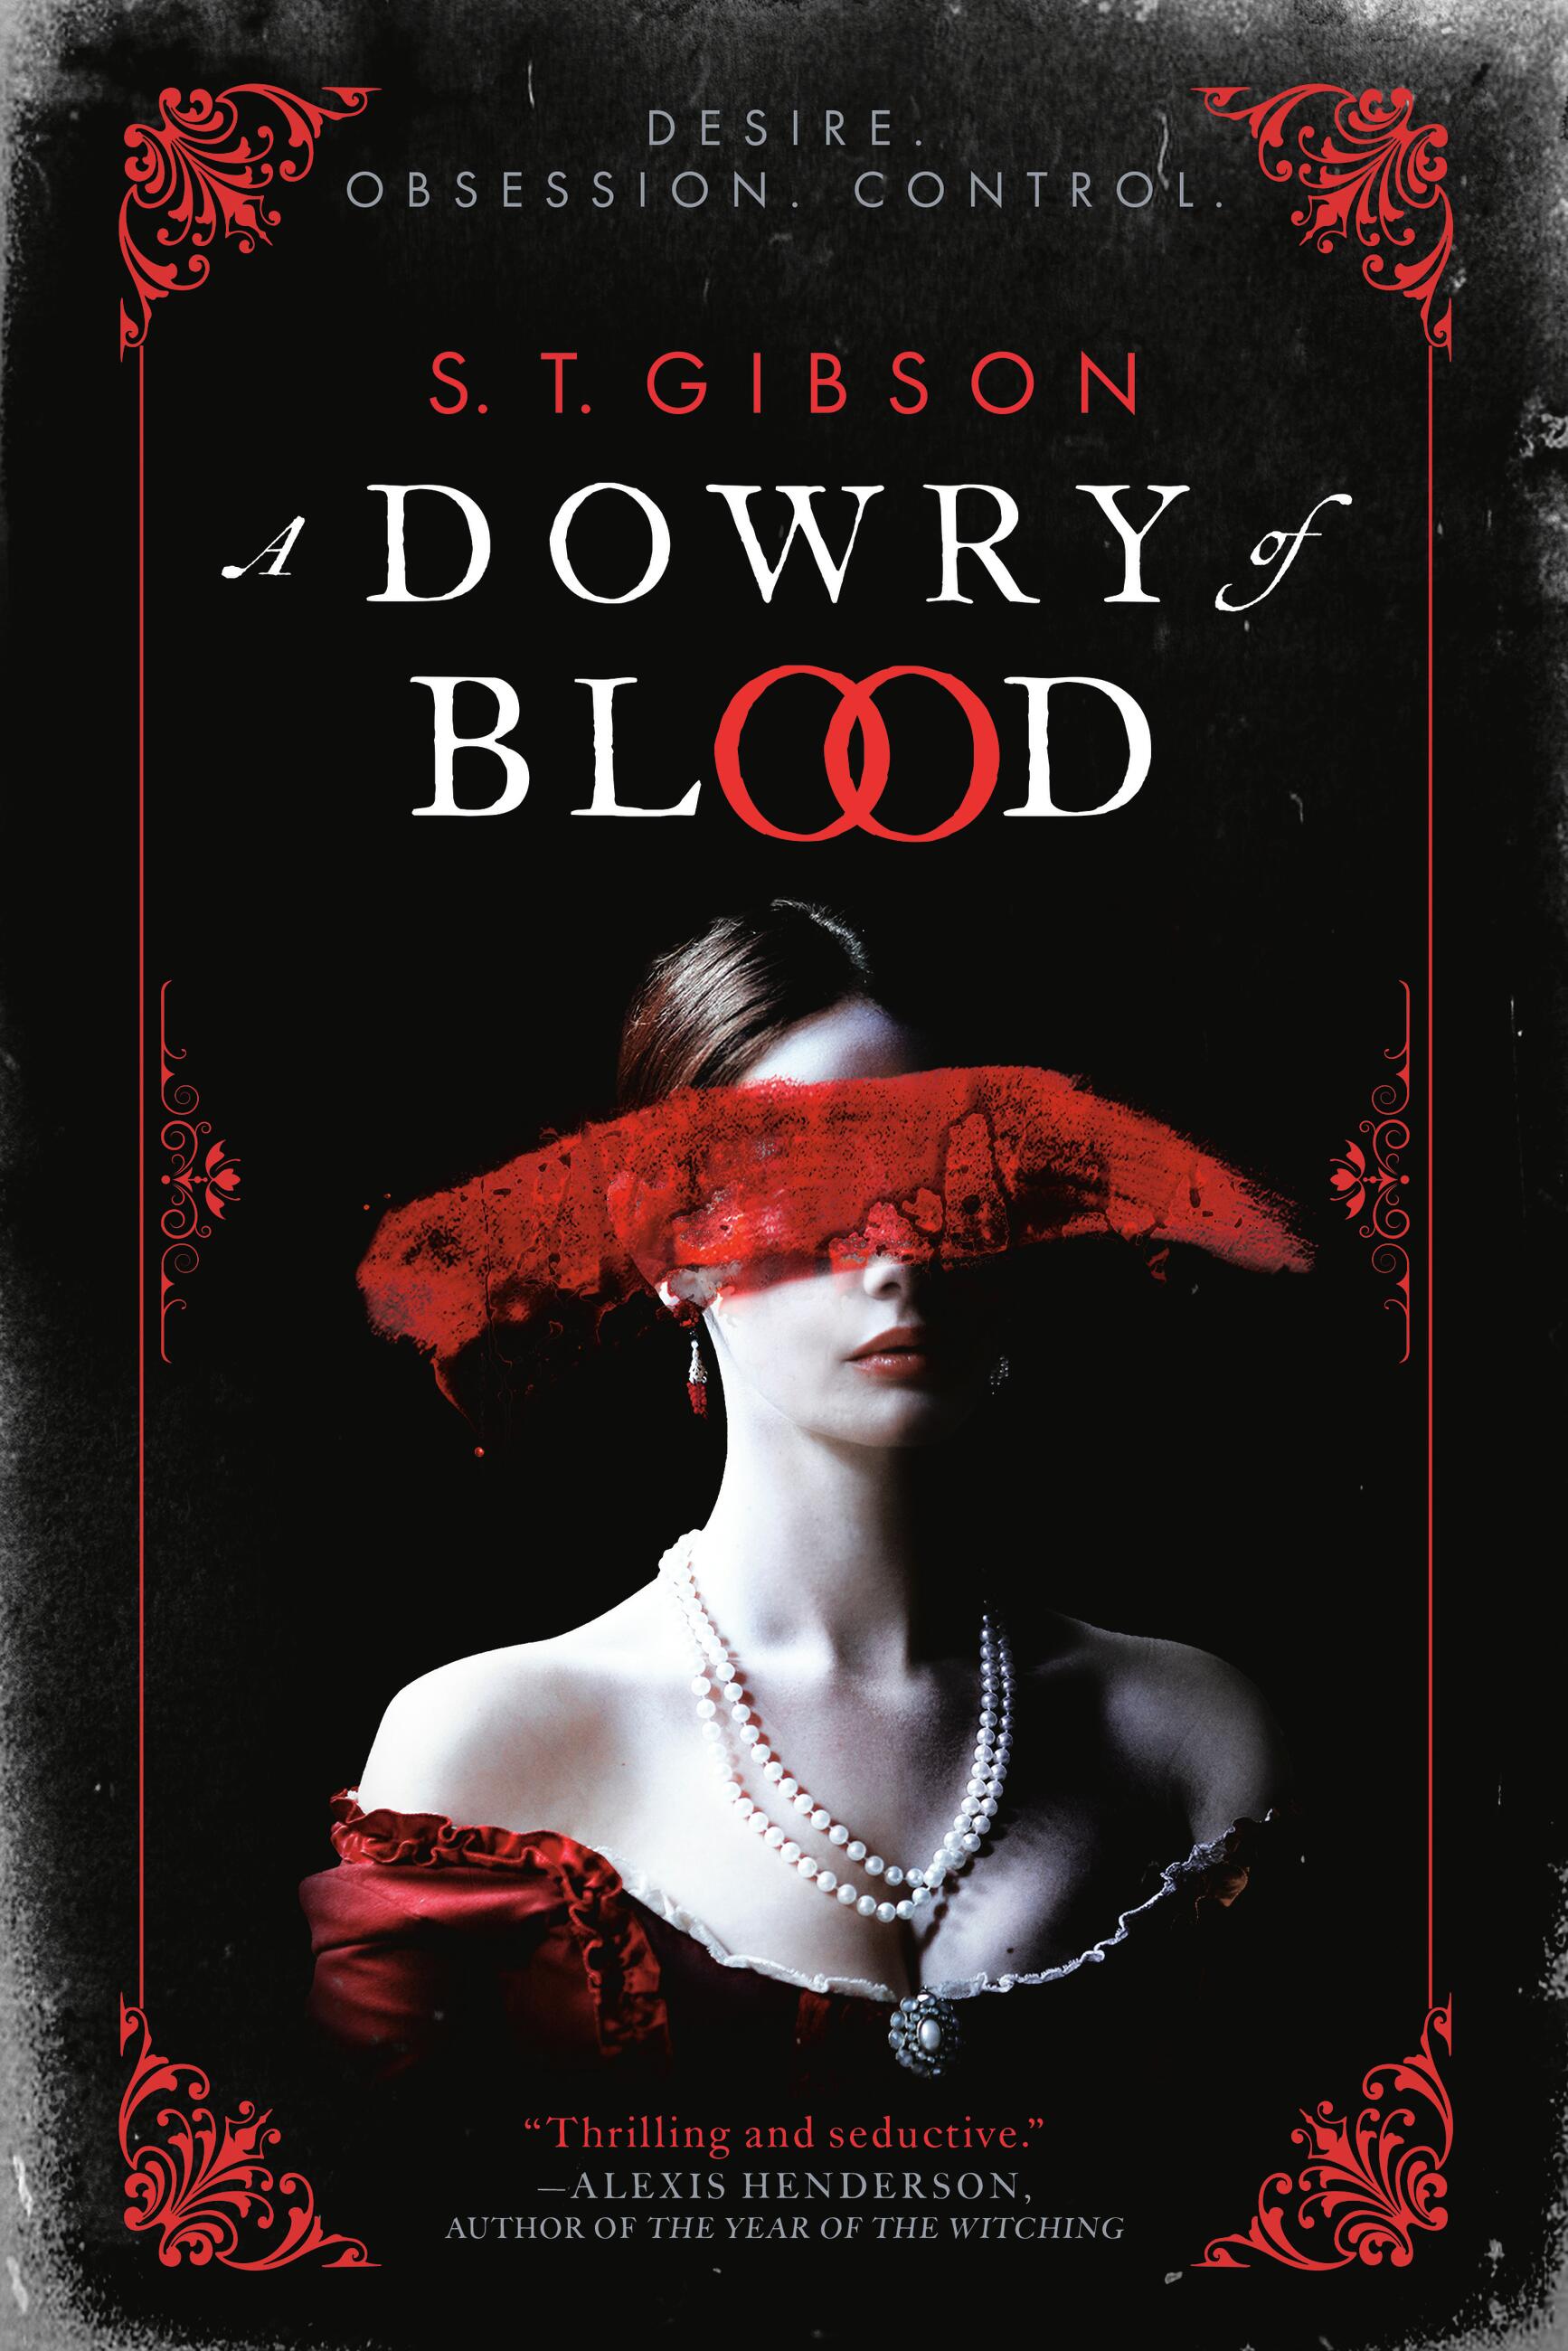 A Dowry of Blood by S. T. Gibson | Hachette Book Group